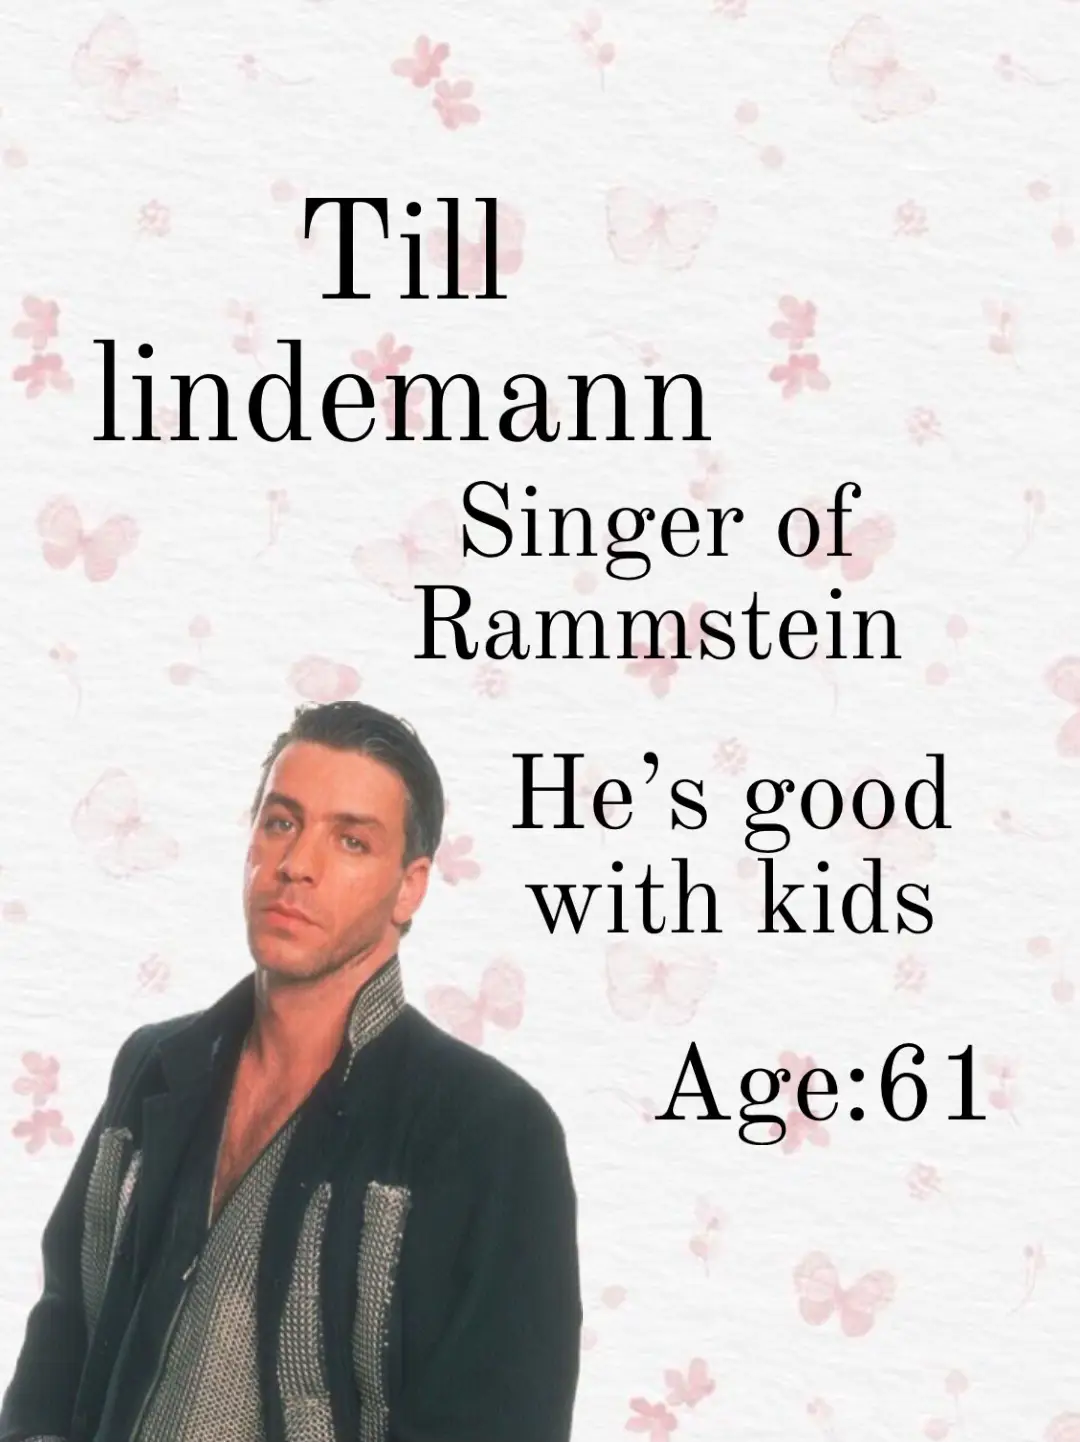  A picture of Till Lindemann, the singer of Rammstein, with a caption that says "He is good with kids".